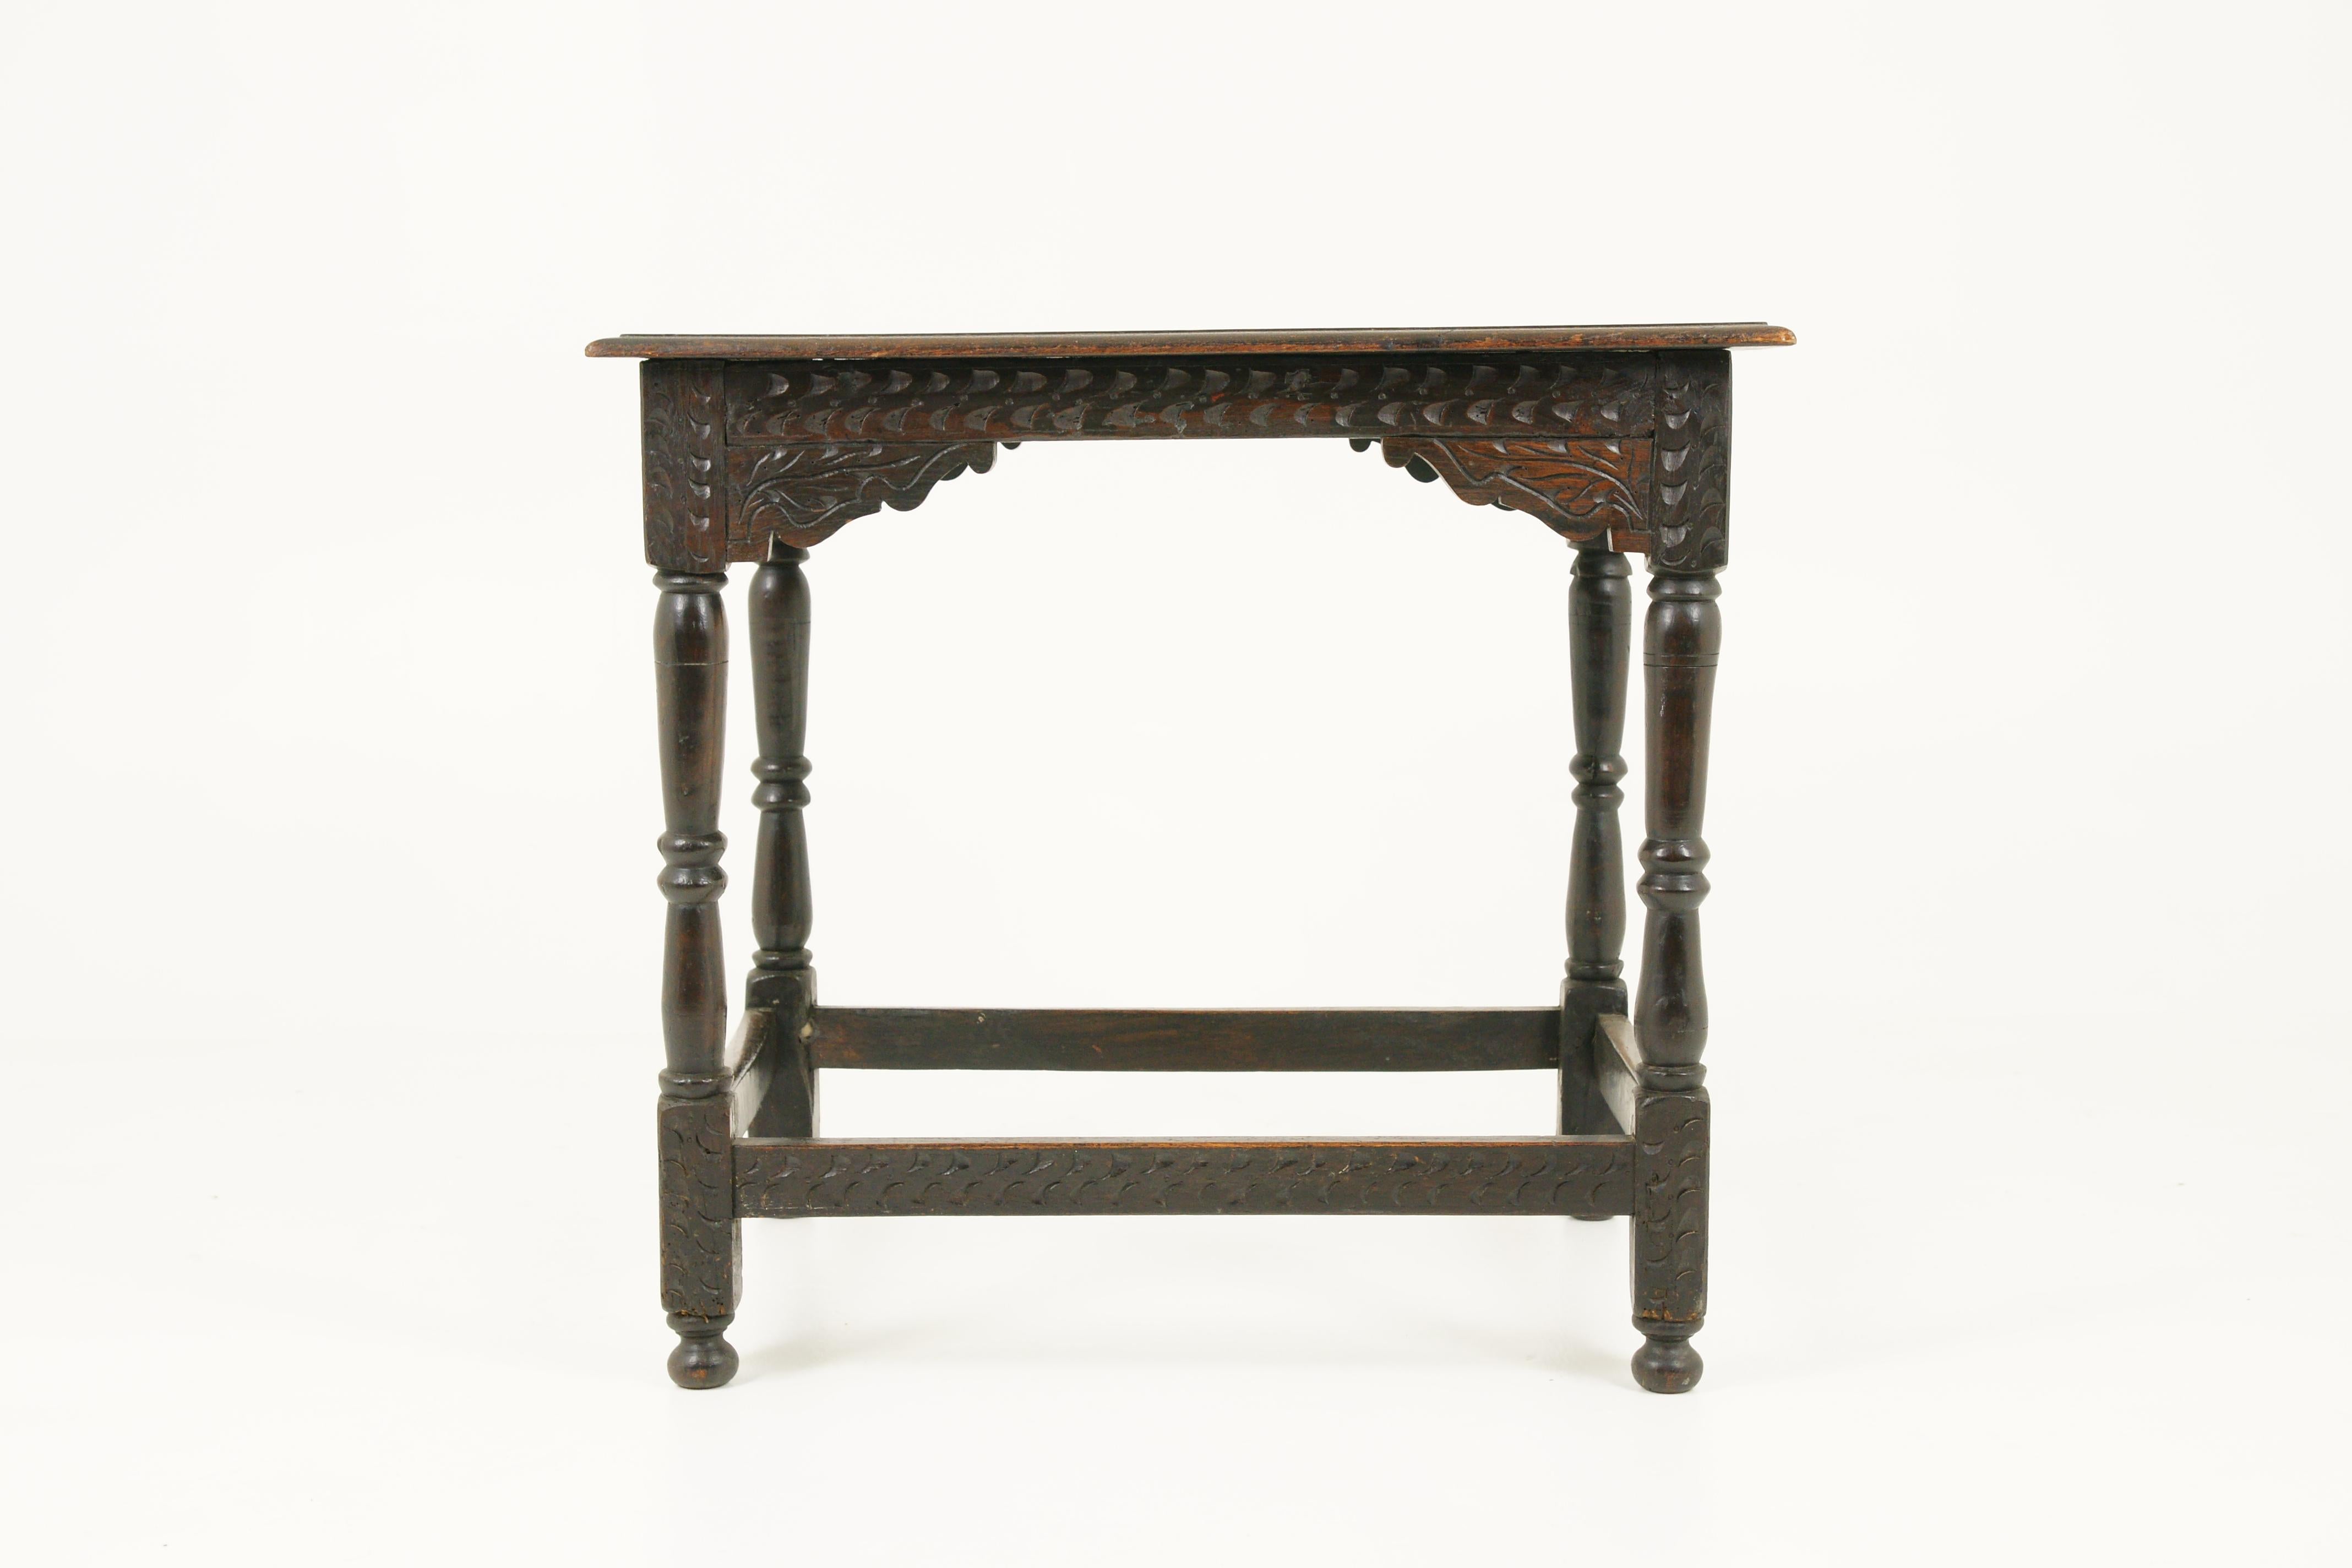 Antique Victorian carved oak hall table, Scotland 1890, antique furniture
Scotland, original finish
Carved rectangular top
Carved frieze below
Standing on turned legs
Connected by thick carved stretchers below
Table is in great condition
Nice